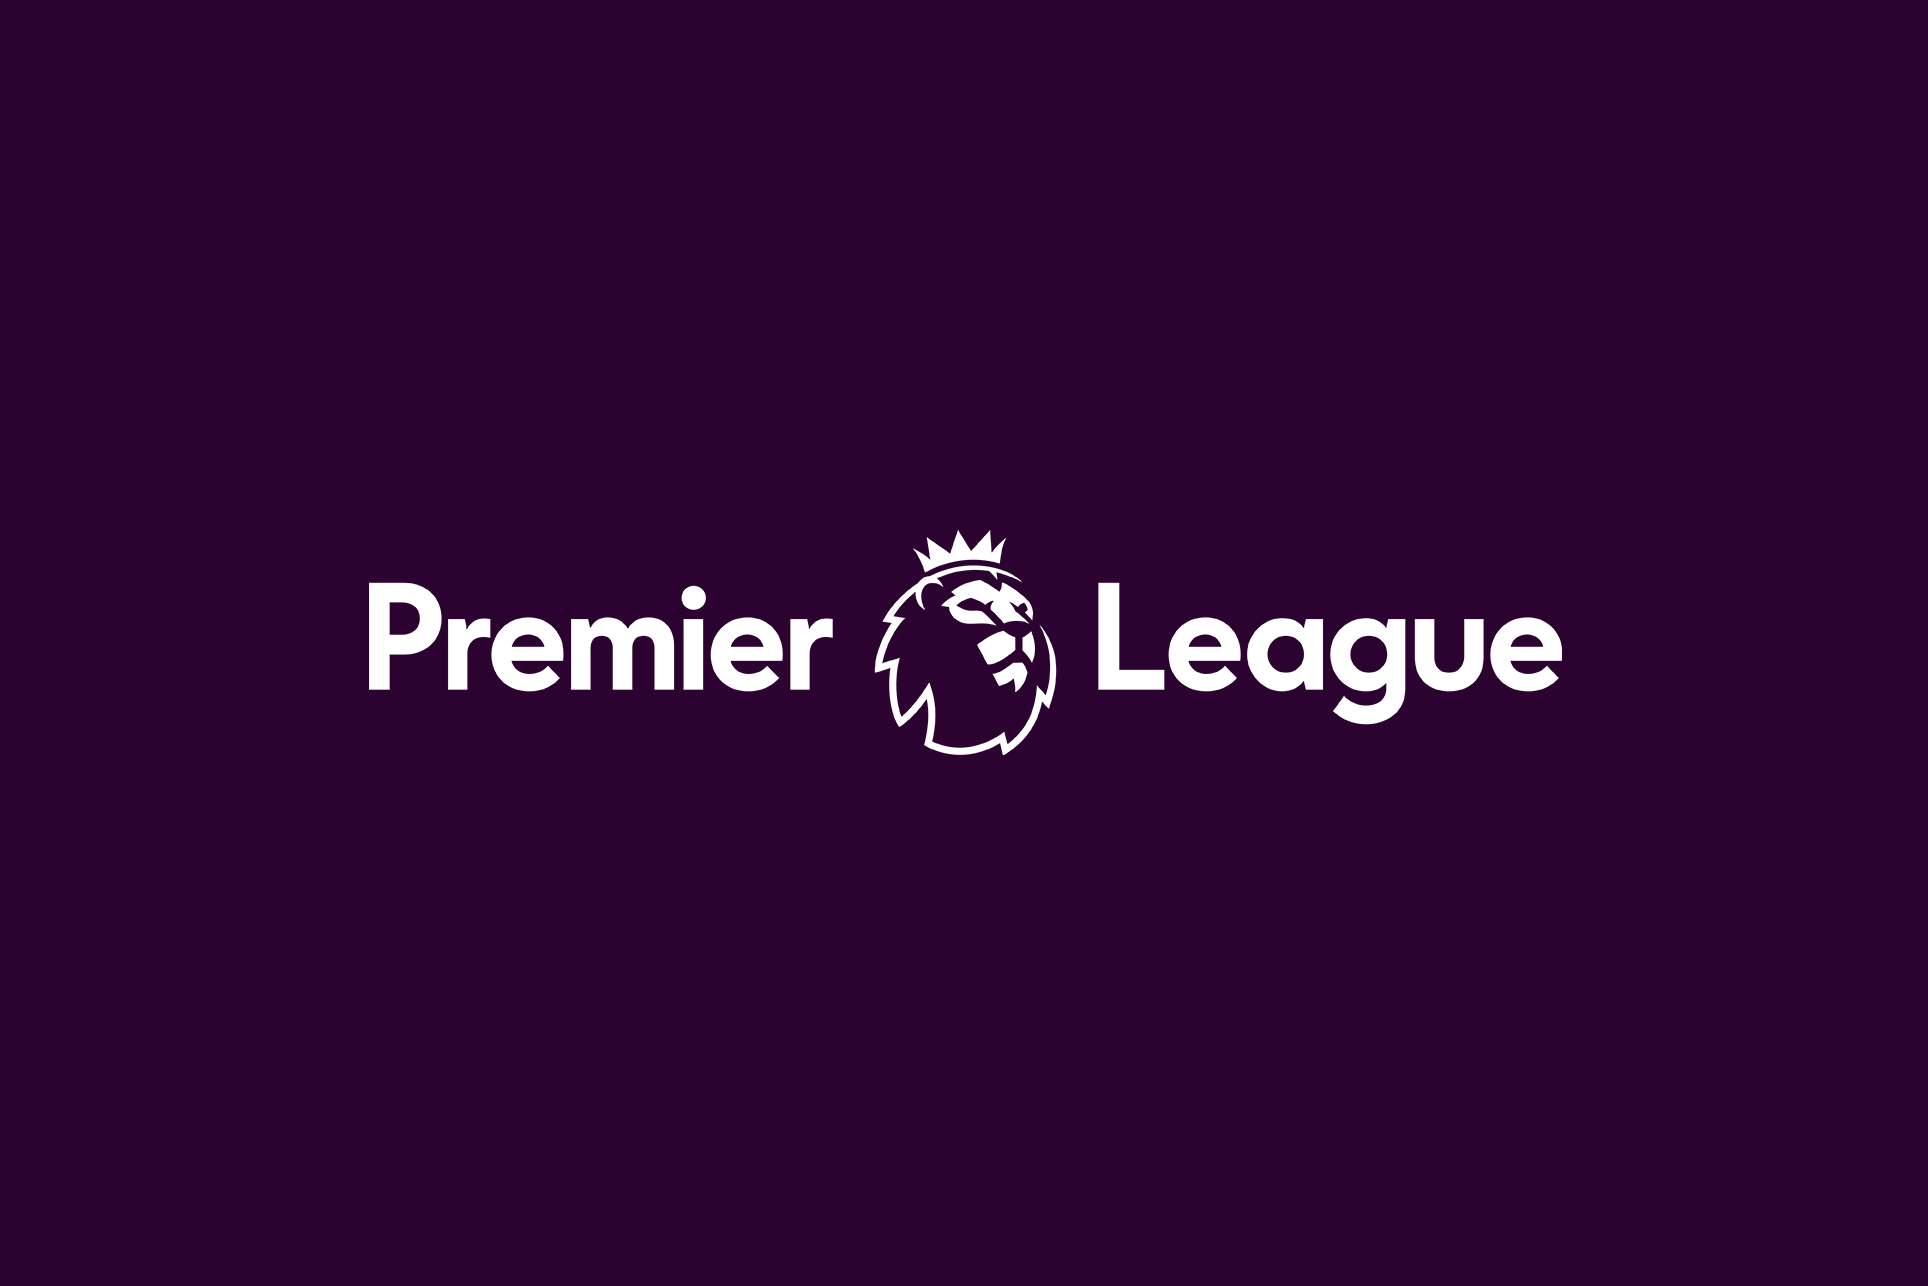 Premier League Rules Out Pandemic Insurance Moving Forward Reports Reinsurance News